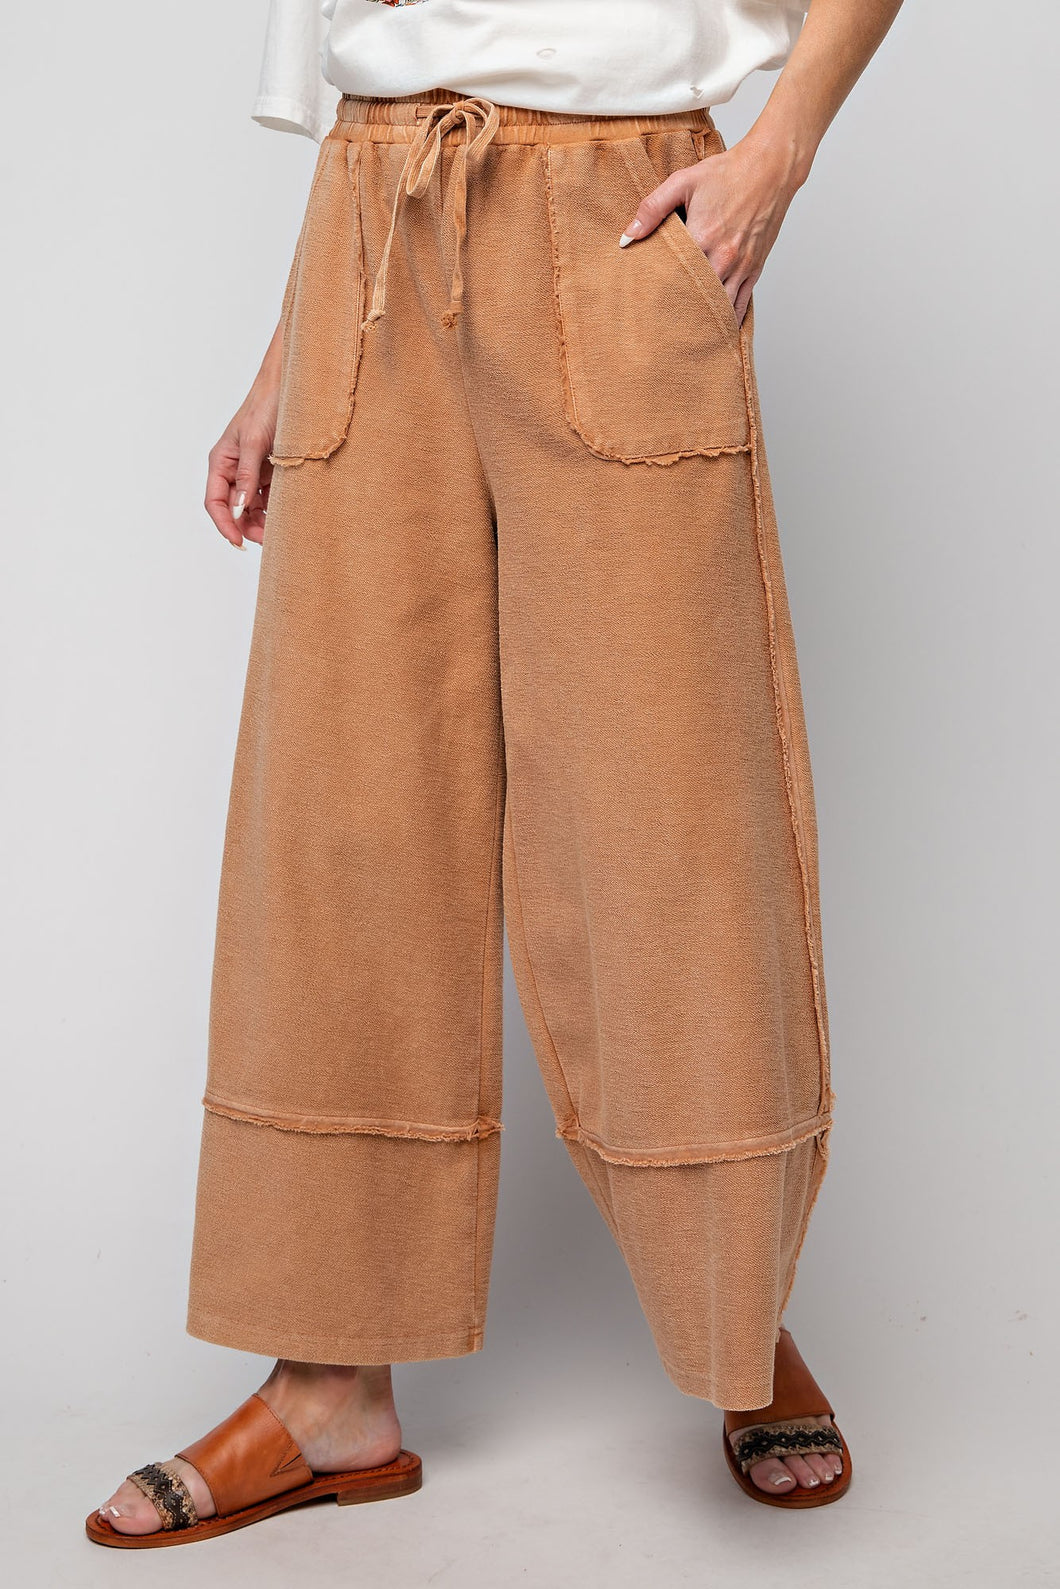 Easel Terry Palazzo Pants in Cinnamon ON ORDER ESTIMATED ARRIVAL LATE OCTOBER Pants Easel   